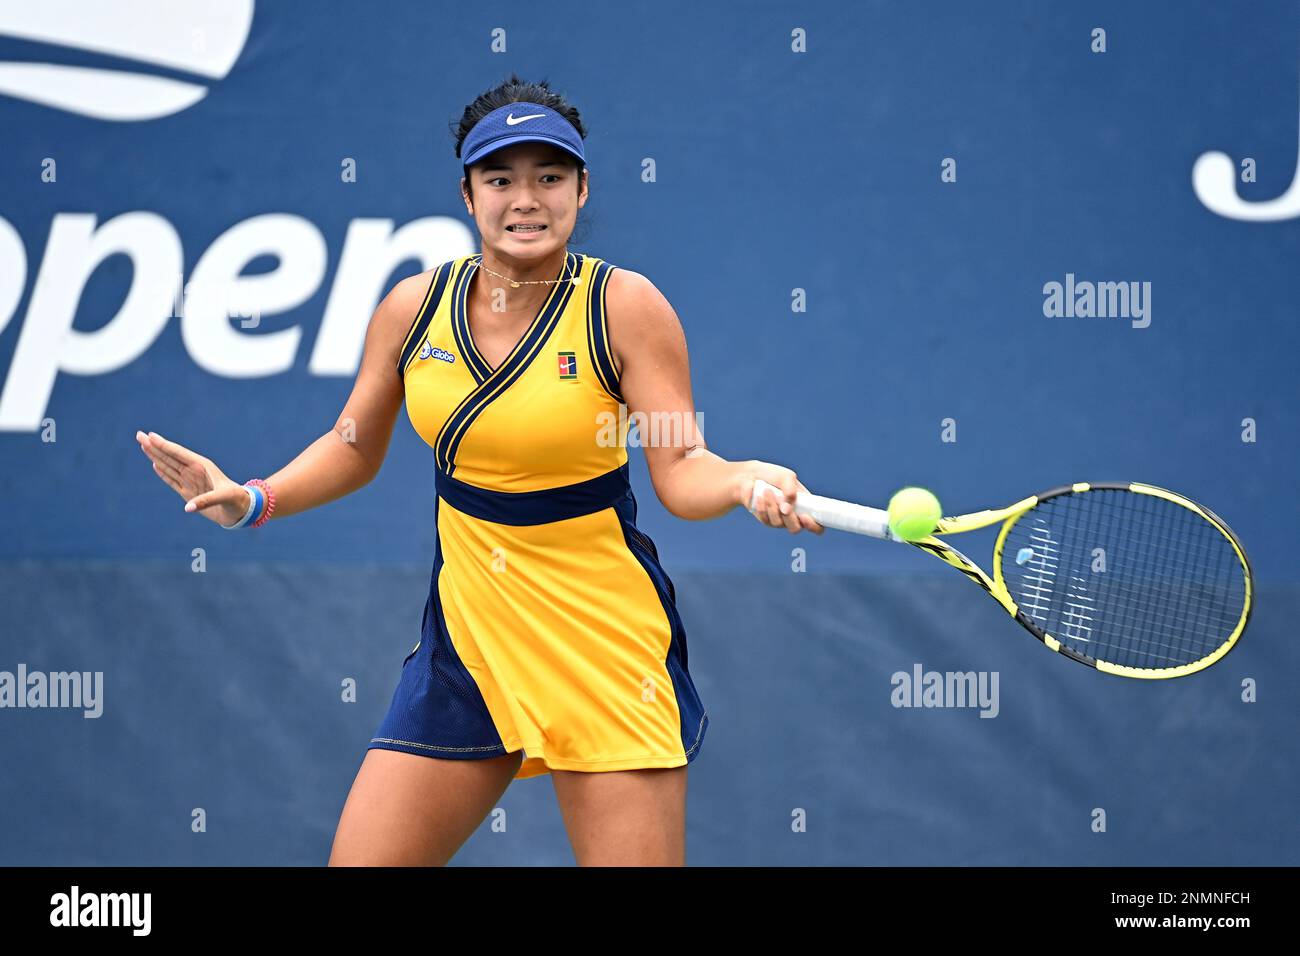 Alexandra Eala in action during a Junior Girls Singles match at the 2021 US Open, Wednesday, Sep